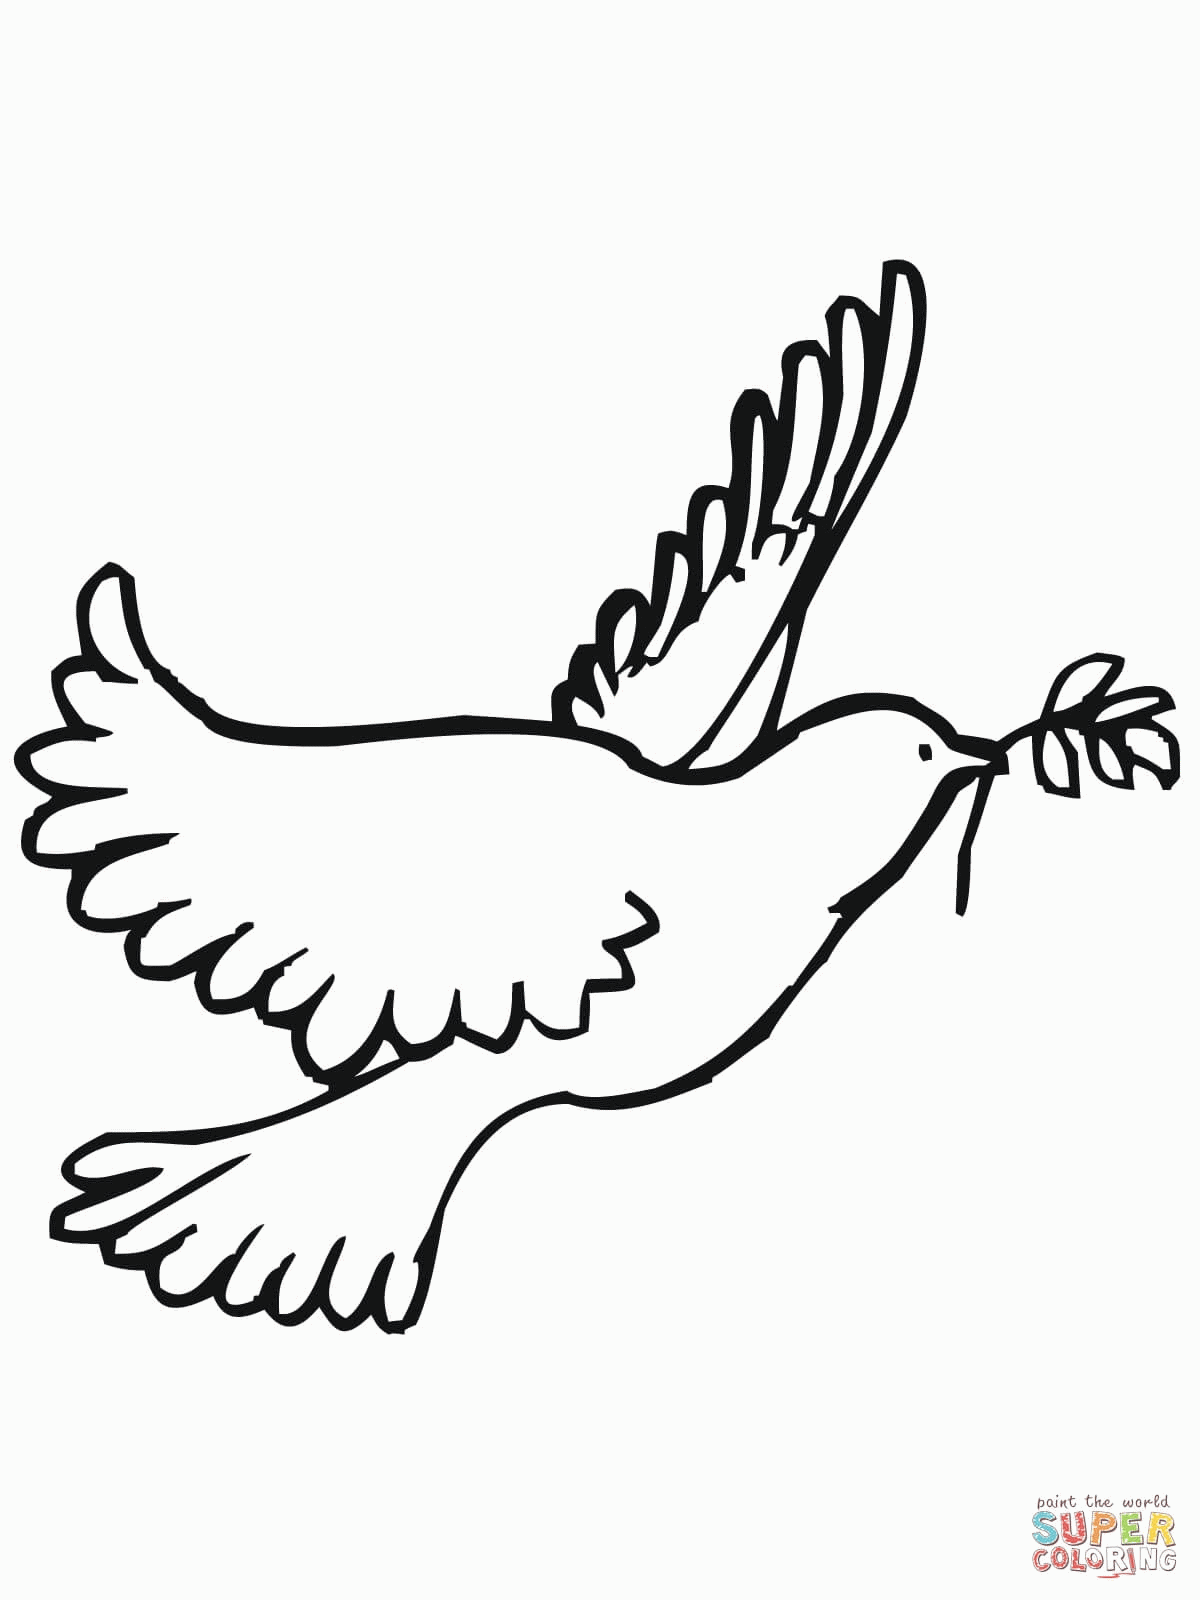 Basic Peace Dove Coloring Page Free Printable Coloring Pages ...